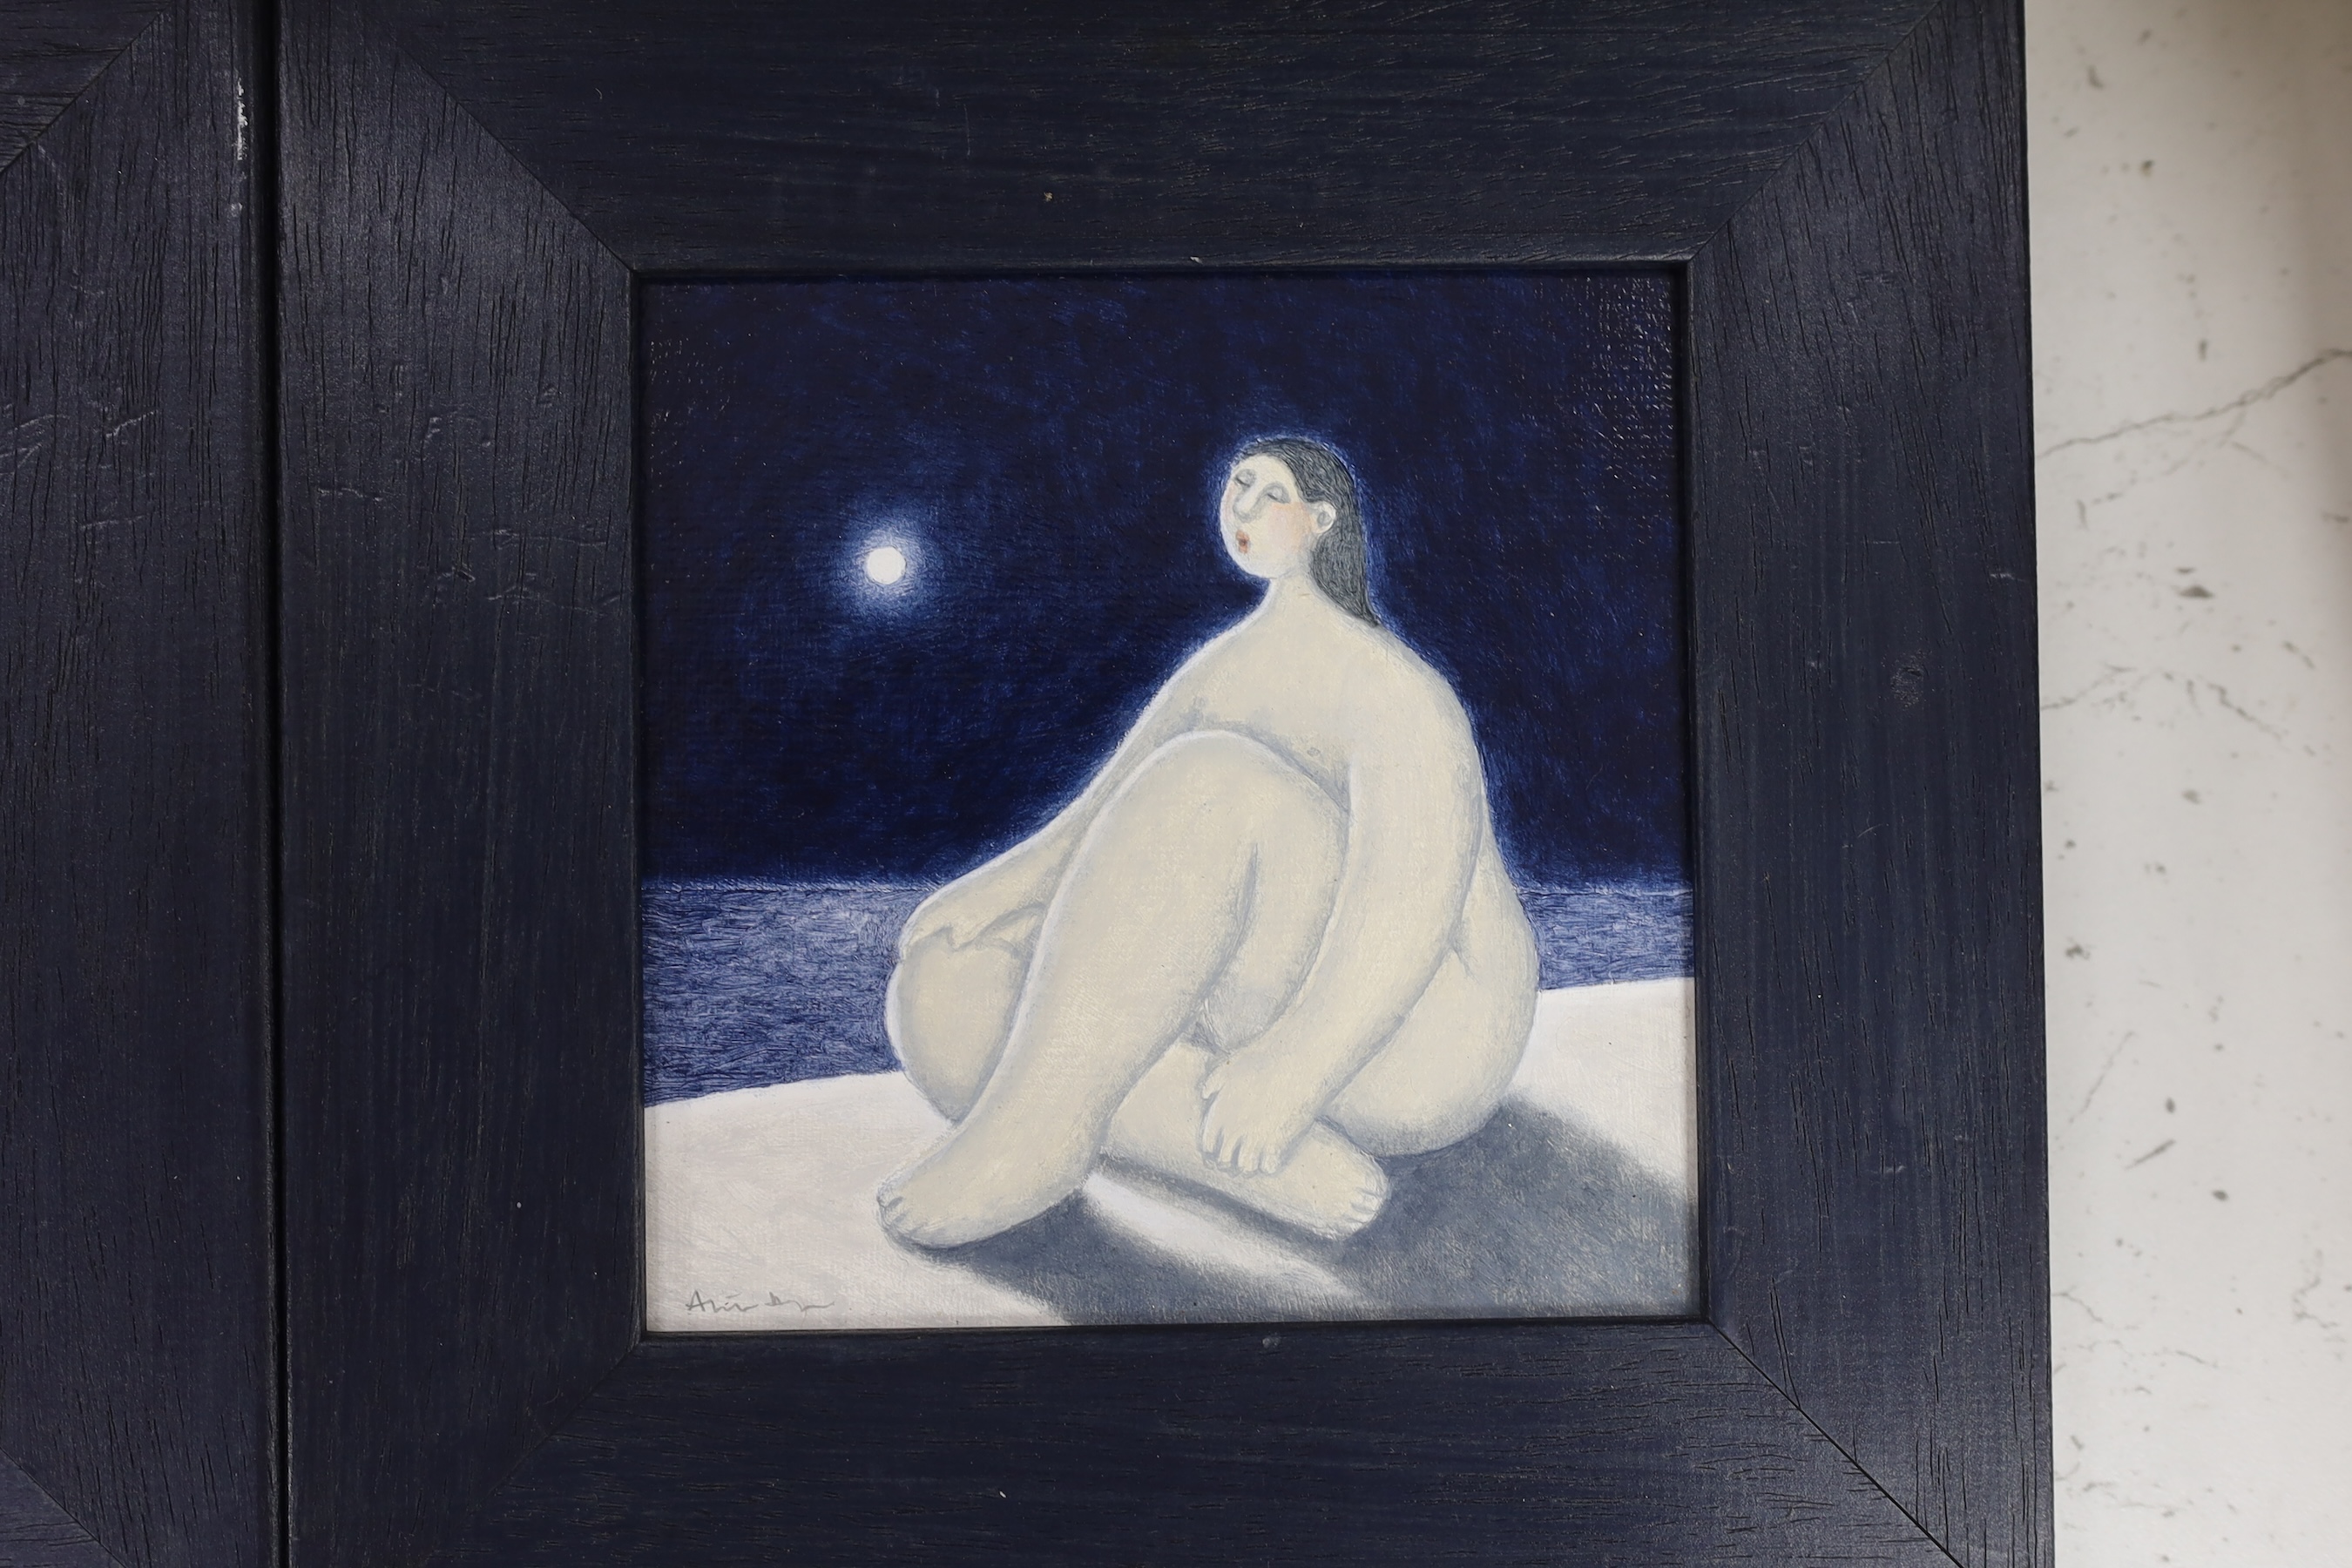 Aliisa Hyslop (b.1957), pair of contemporary acrylics on board, Moonlit landscapes with seated nude figures, signed, 13.5 x 13.5cm. Condition - good